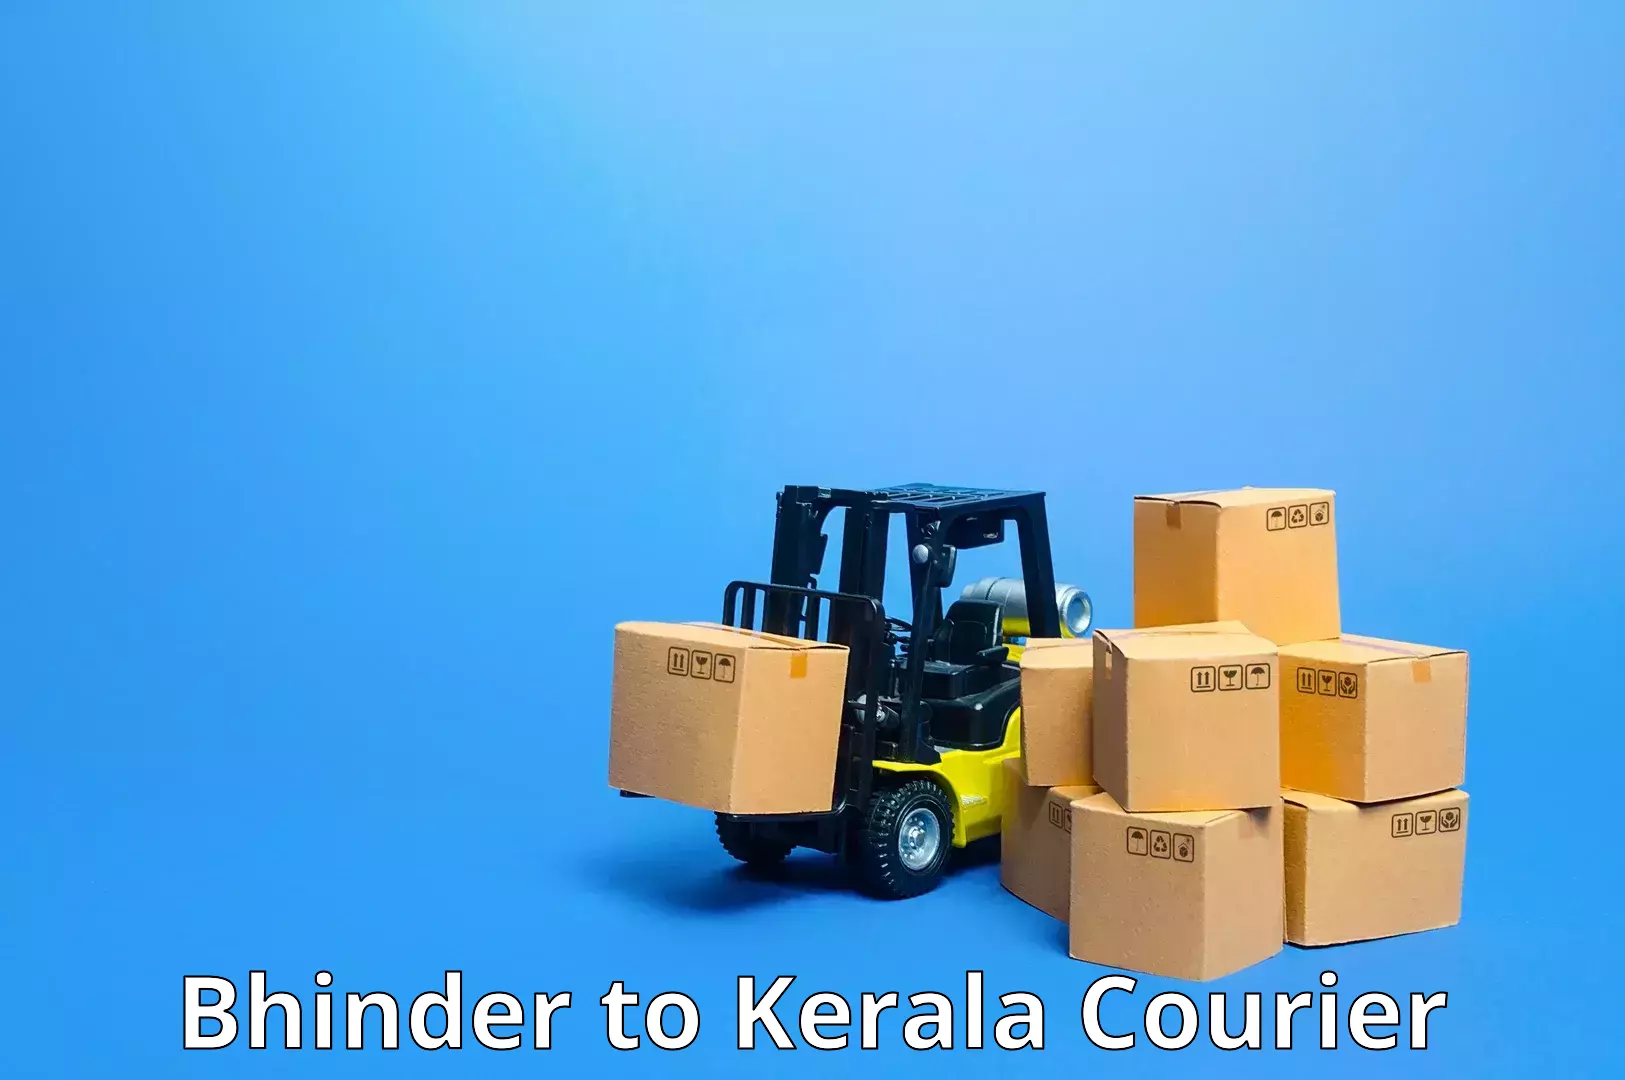 Package delivery network Bhinder to Alappuzha